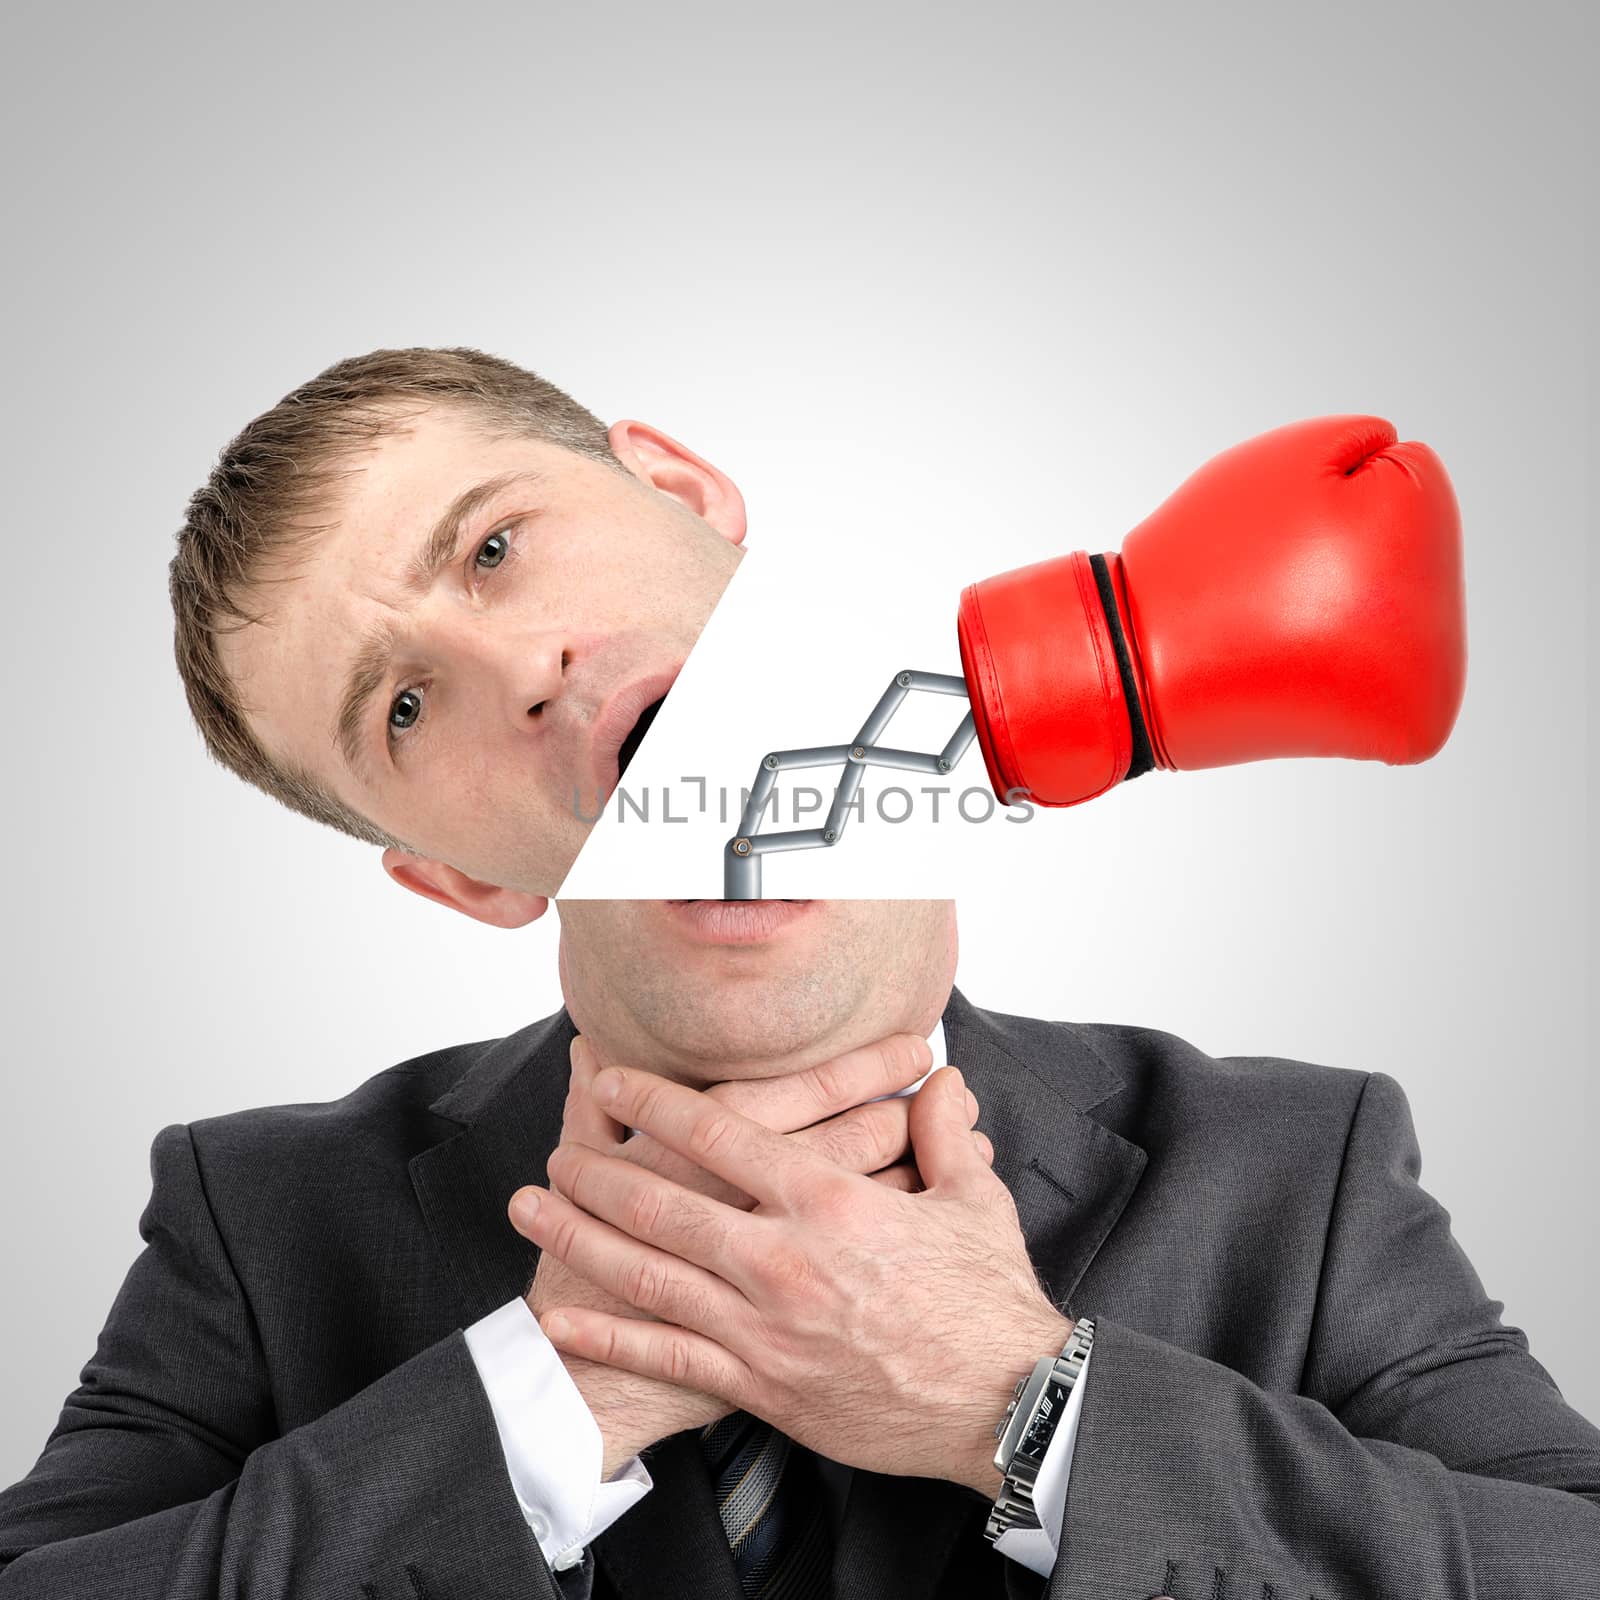 Boxing glove beating from businessmans head on grey background, close up view